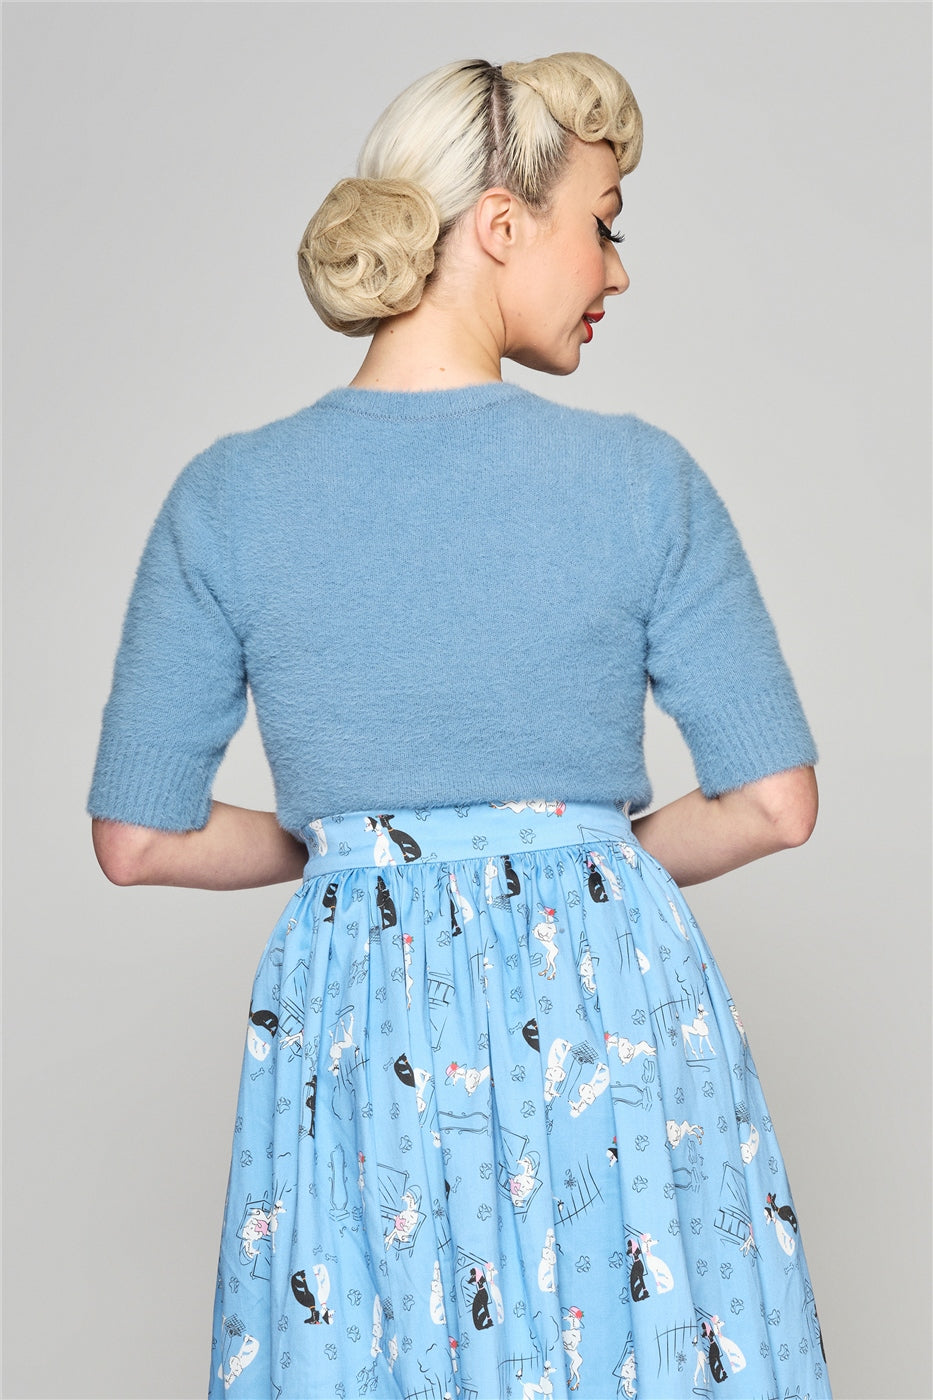 Blonde woman with vintage makeup facing away from the camera wearing a blue fluffy Chrissie top and blue poodle skirt